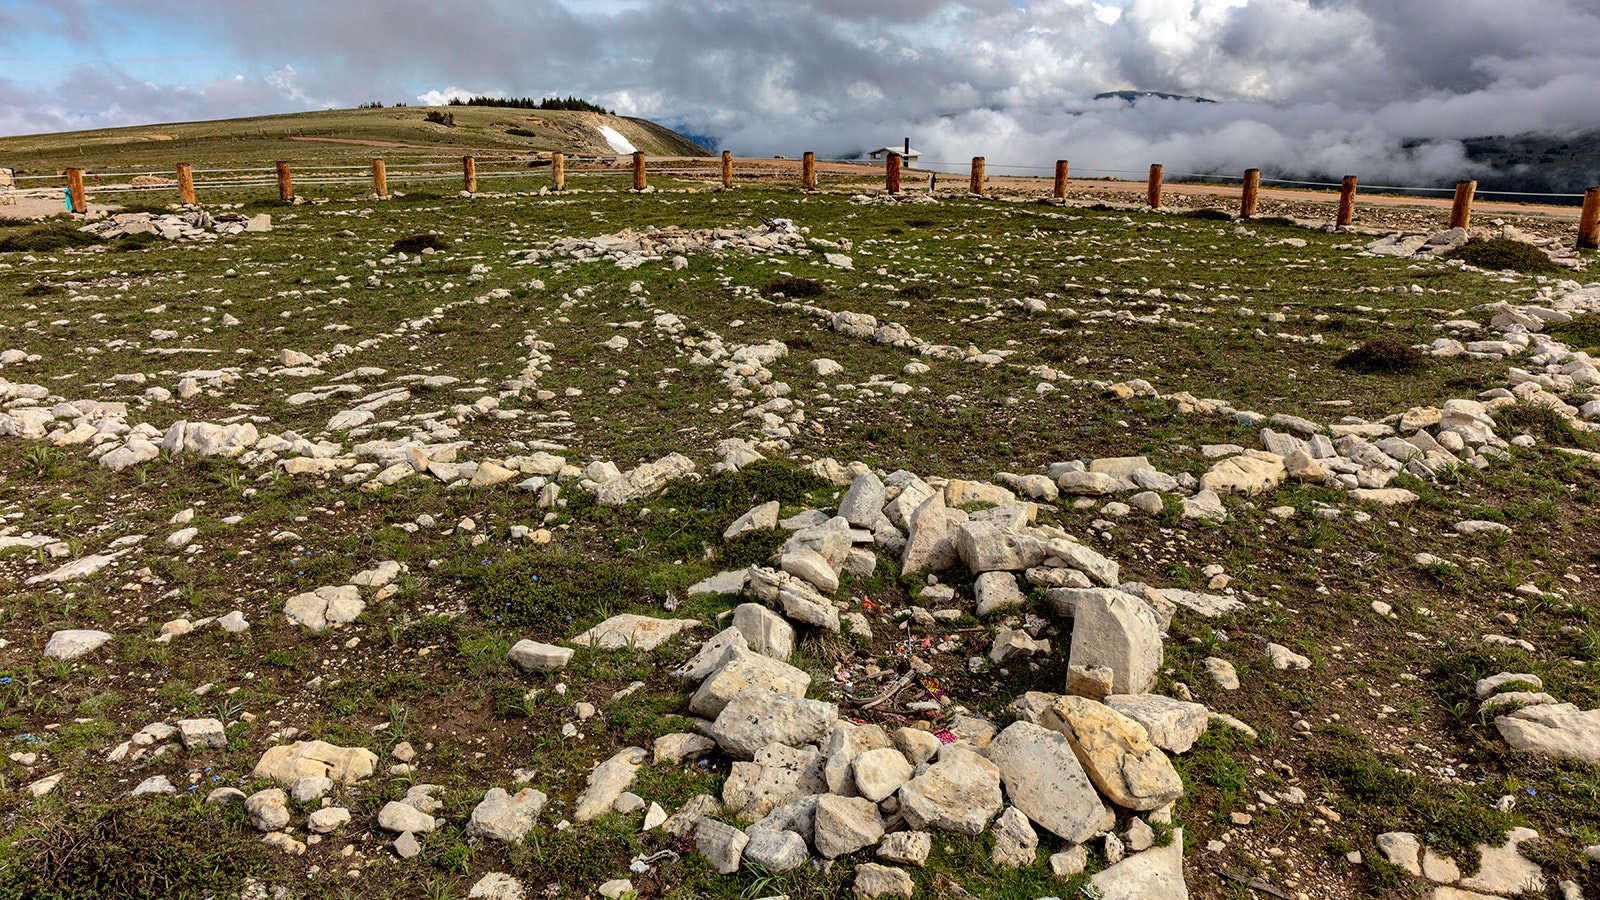 The Medicine Wheel at Medicine Mountain National Historic Landmark in the Bighorn Mountains of Wyoming.